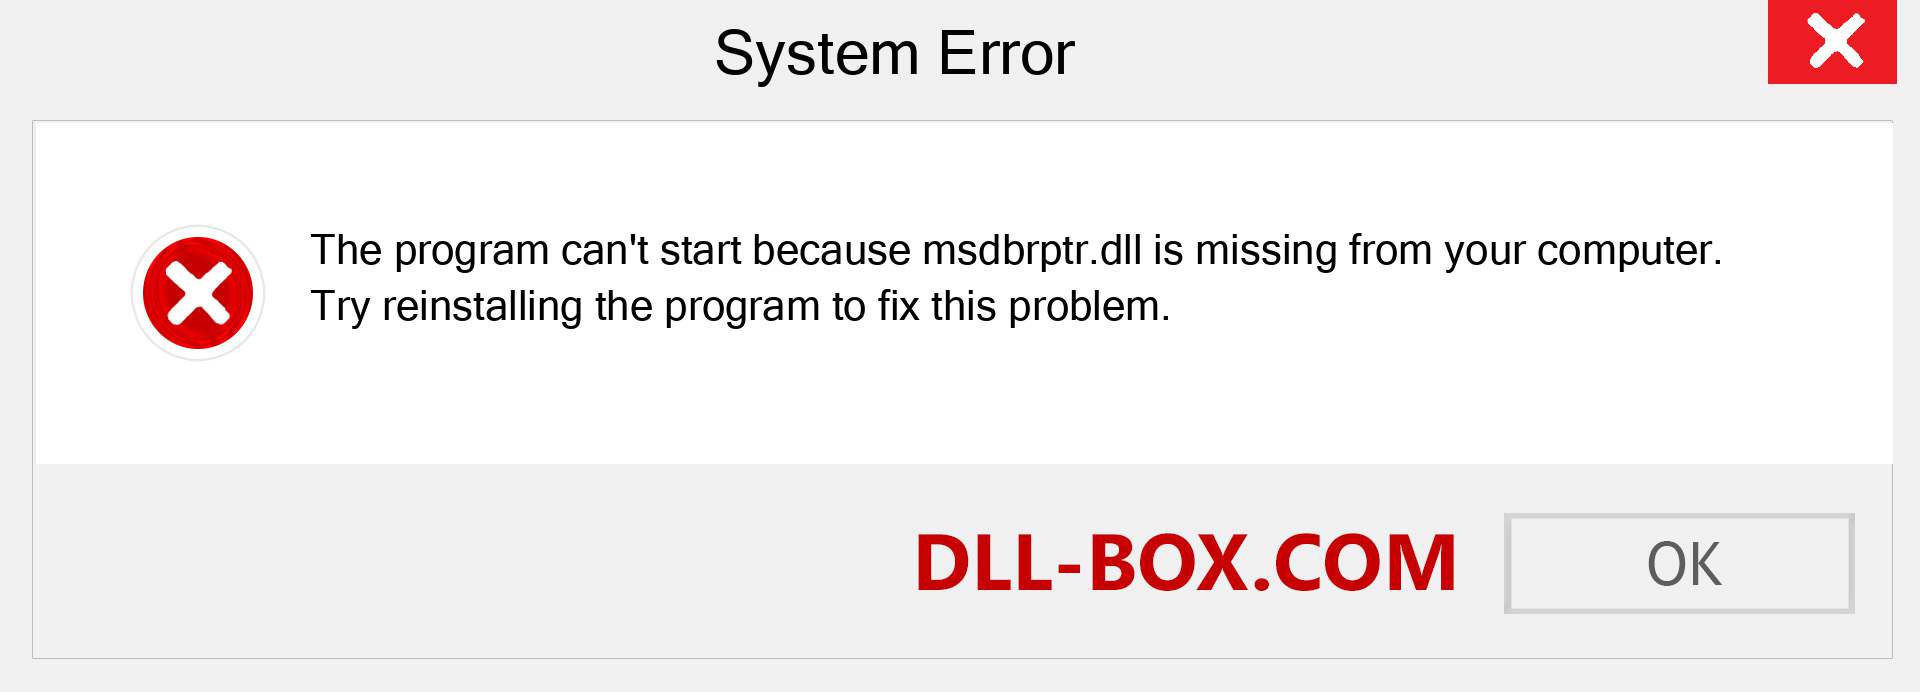  msdbrptr.dll file is missing?. Download for Windows 7, 8, 10 - Fix  msdbrptr dll Missing Error on Windows, photos, images